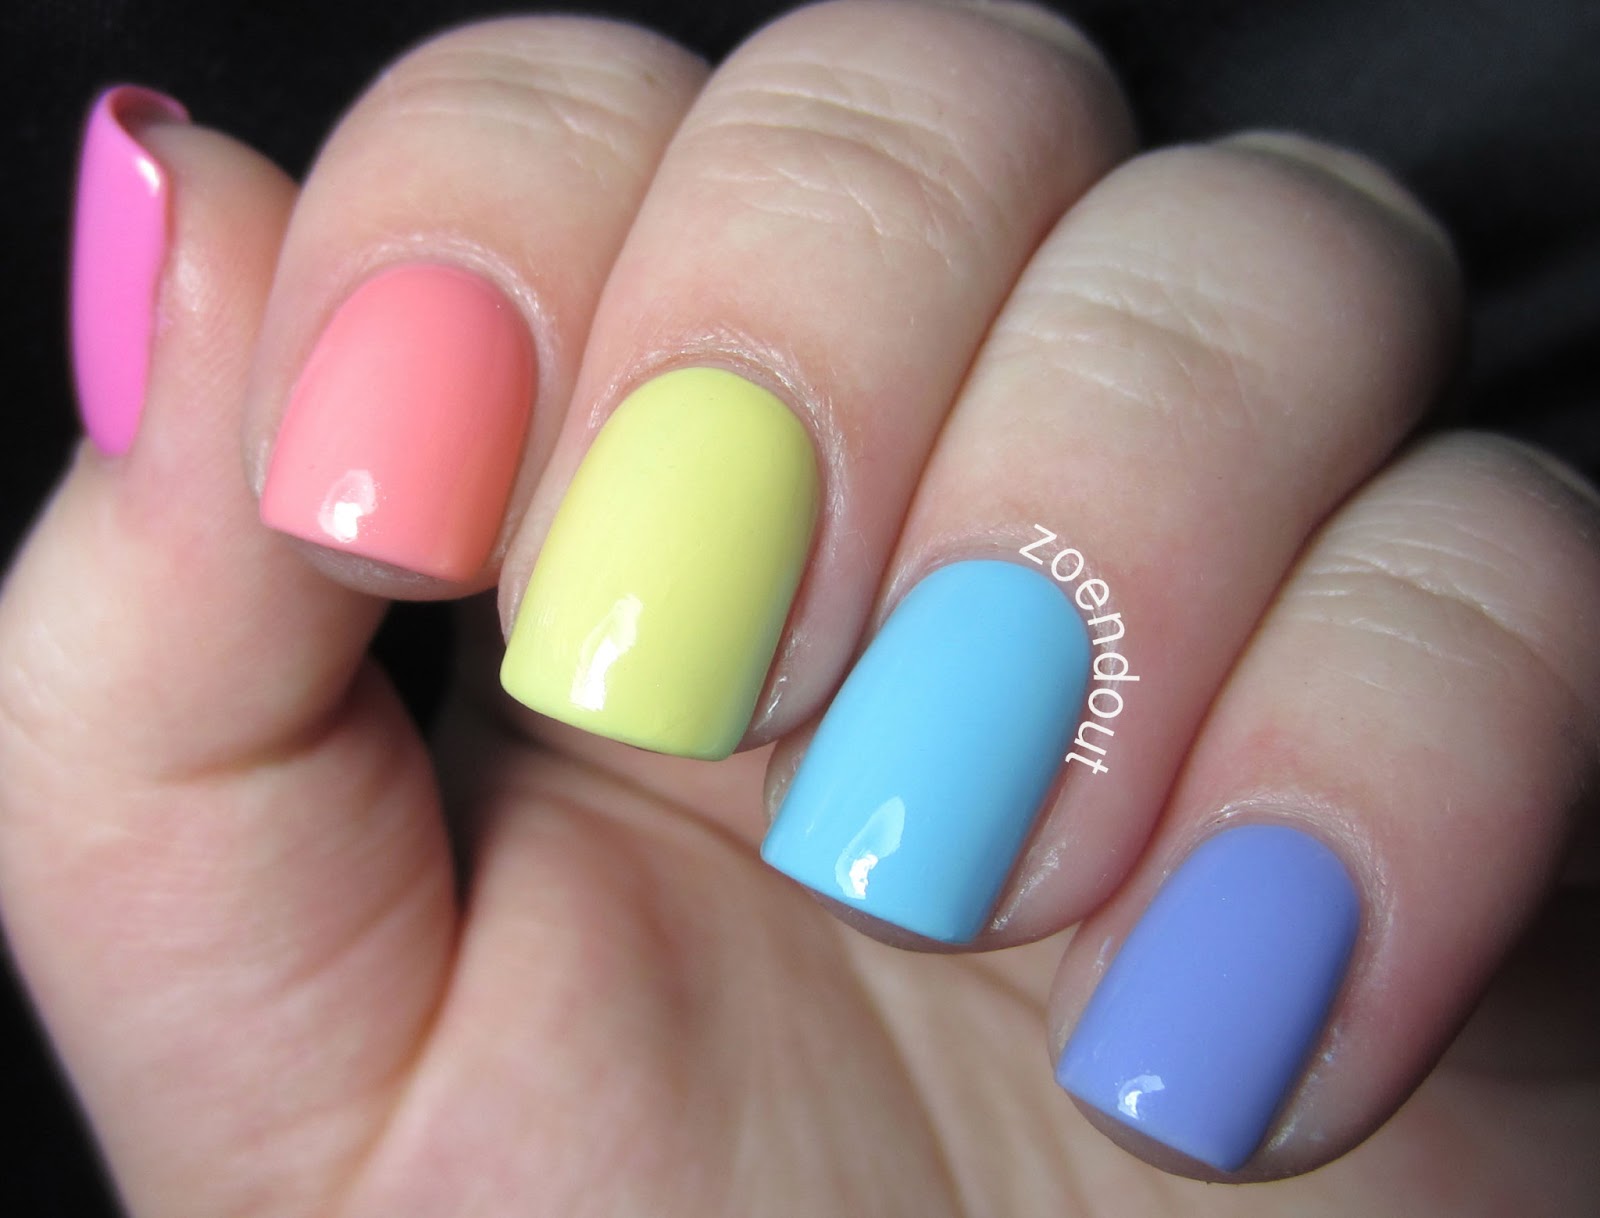 7. Peach and pastel rainbow nails with a single cloud design - wide 3